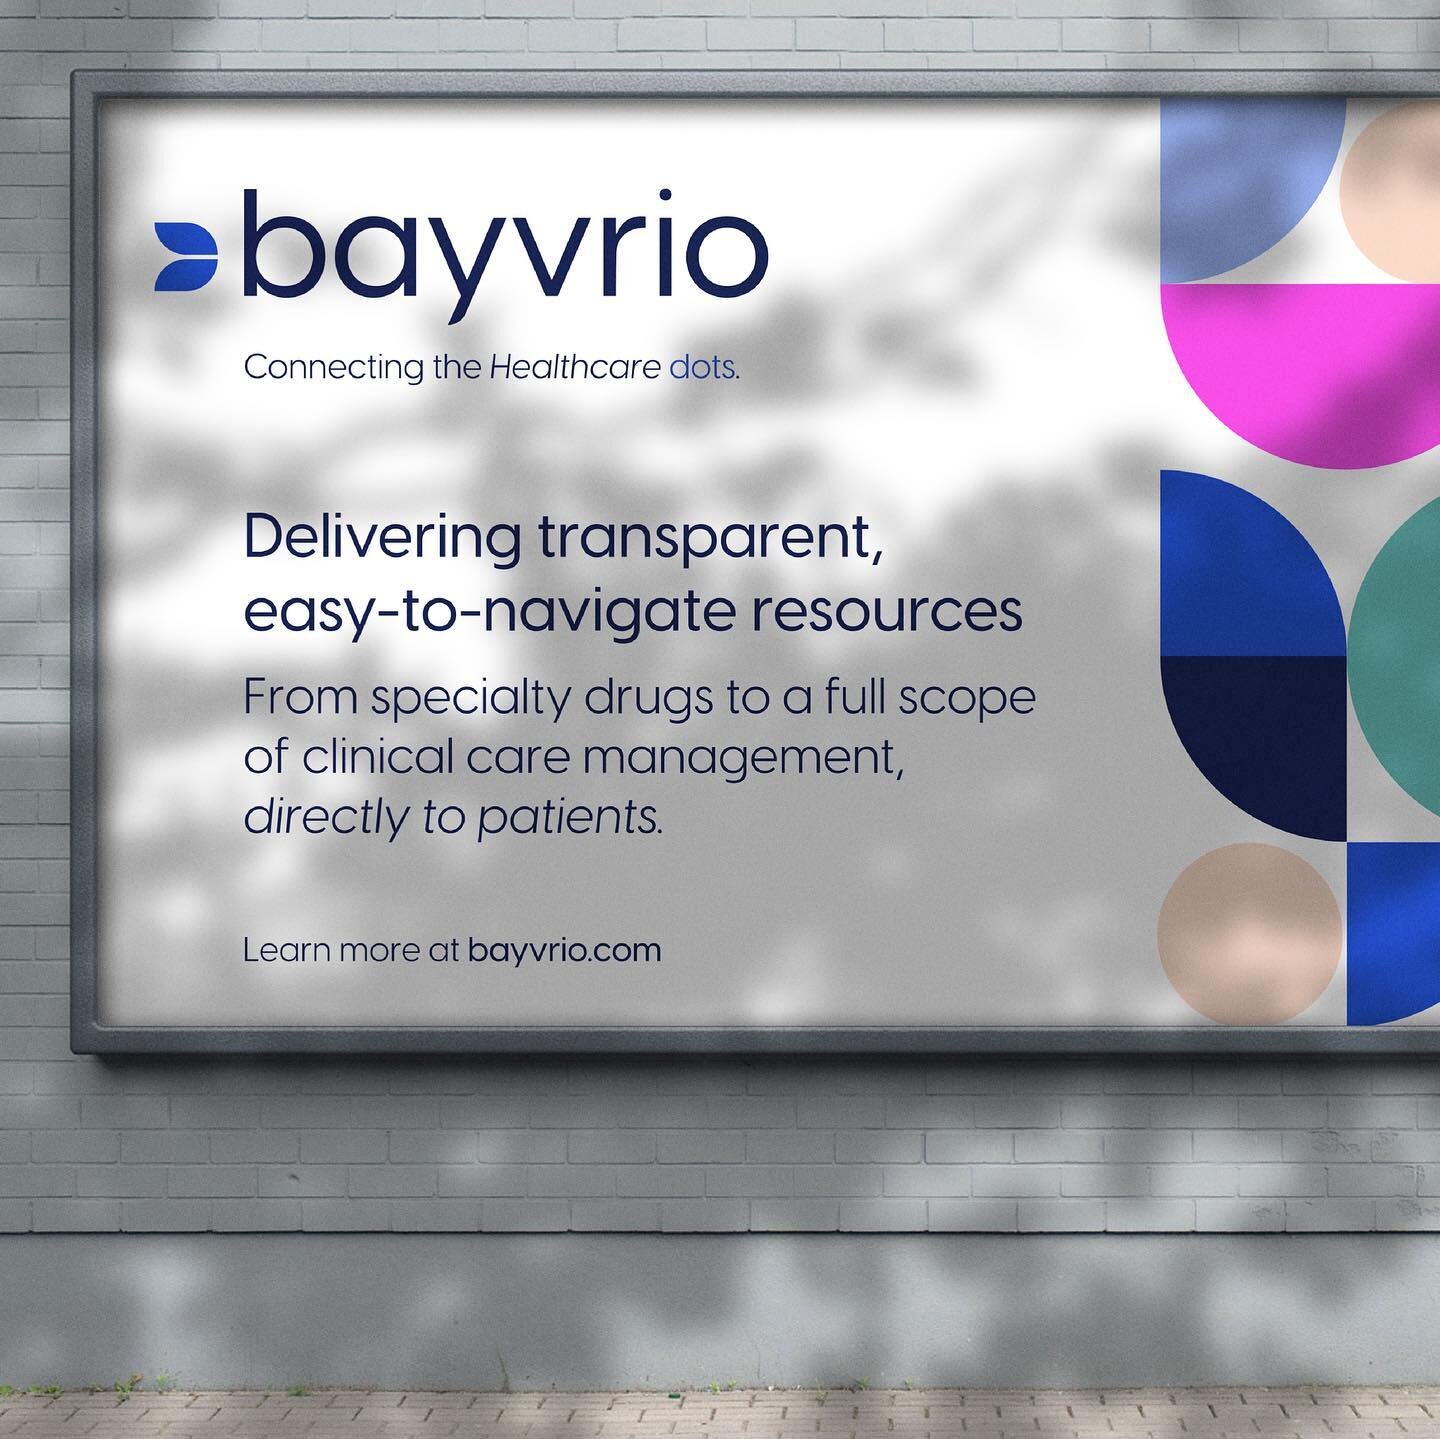 We loved this project and can&rsquo;t wait to see it out in the world!
Creative agency: @hypegroup 
Branding design: @soleil_creative 
Project: Fresh, out-of-the-box branding identity for healthcare company, Bayvrio. ⚪️🔵🟣